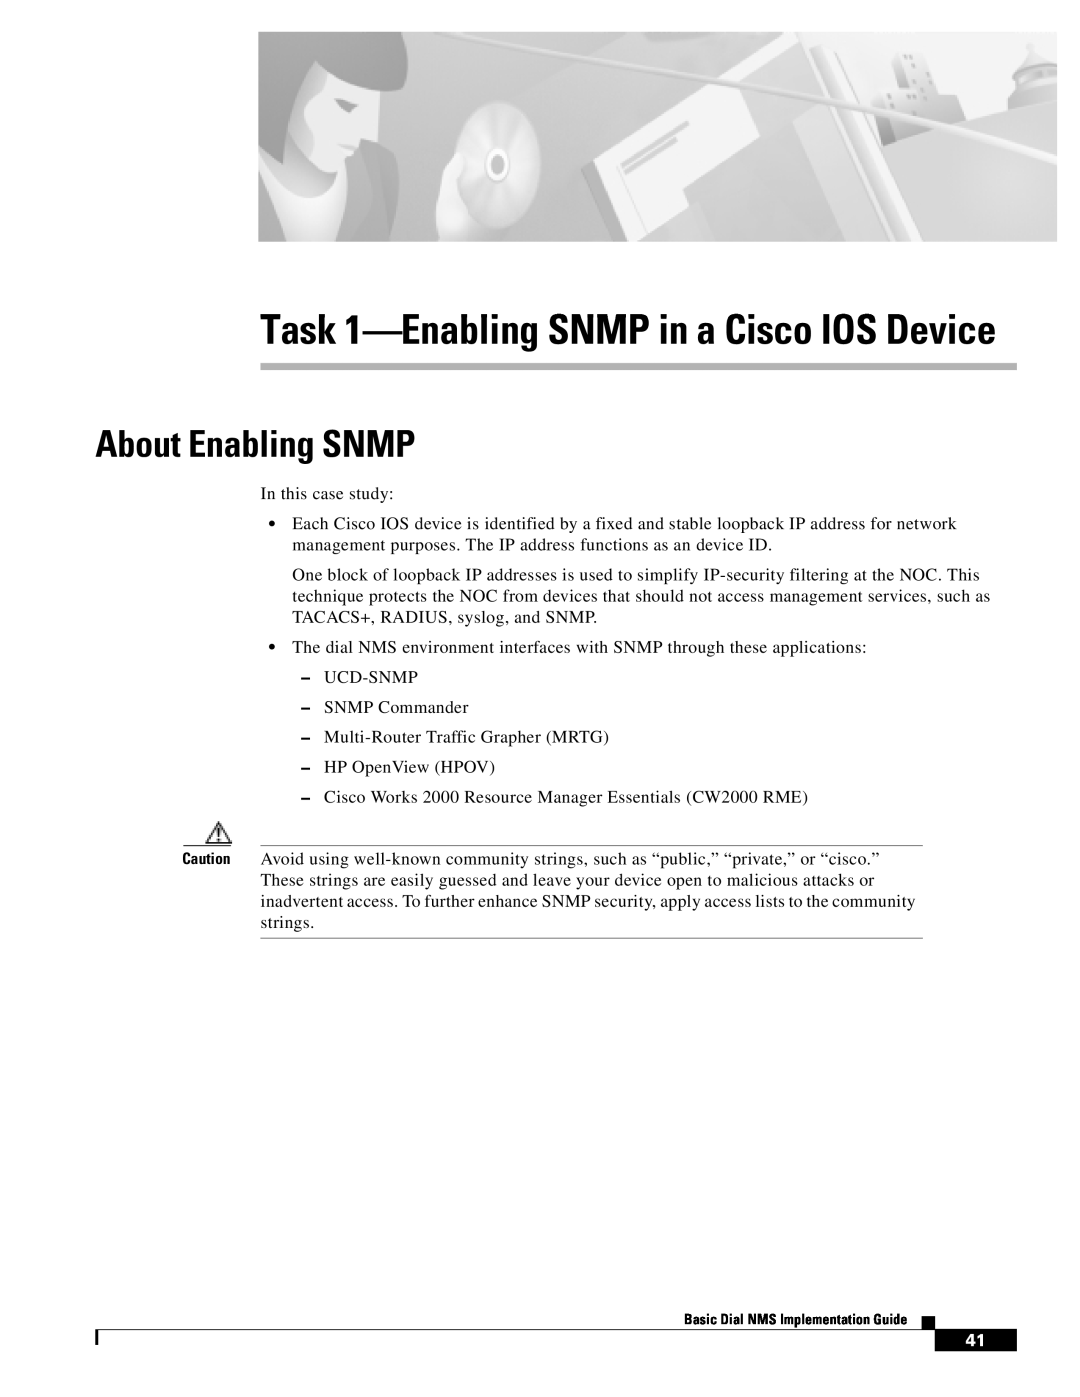 Cisco Systems Dial NMS manual Task 1-Enabling SNMP in a Cisco IOS Device, About Enabling SNMP 